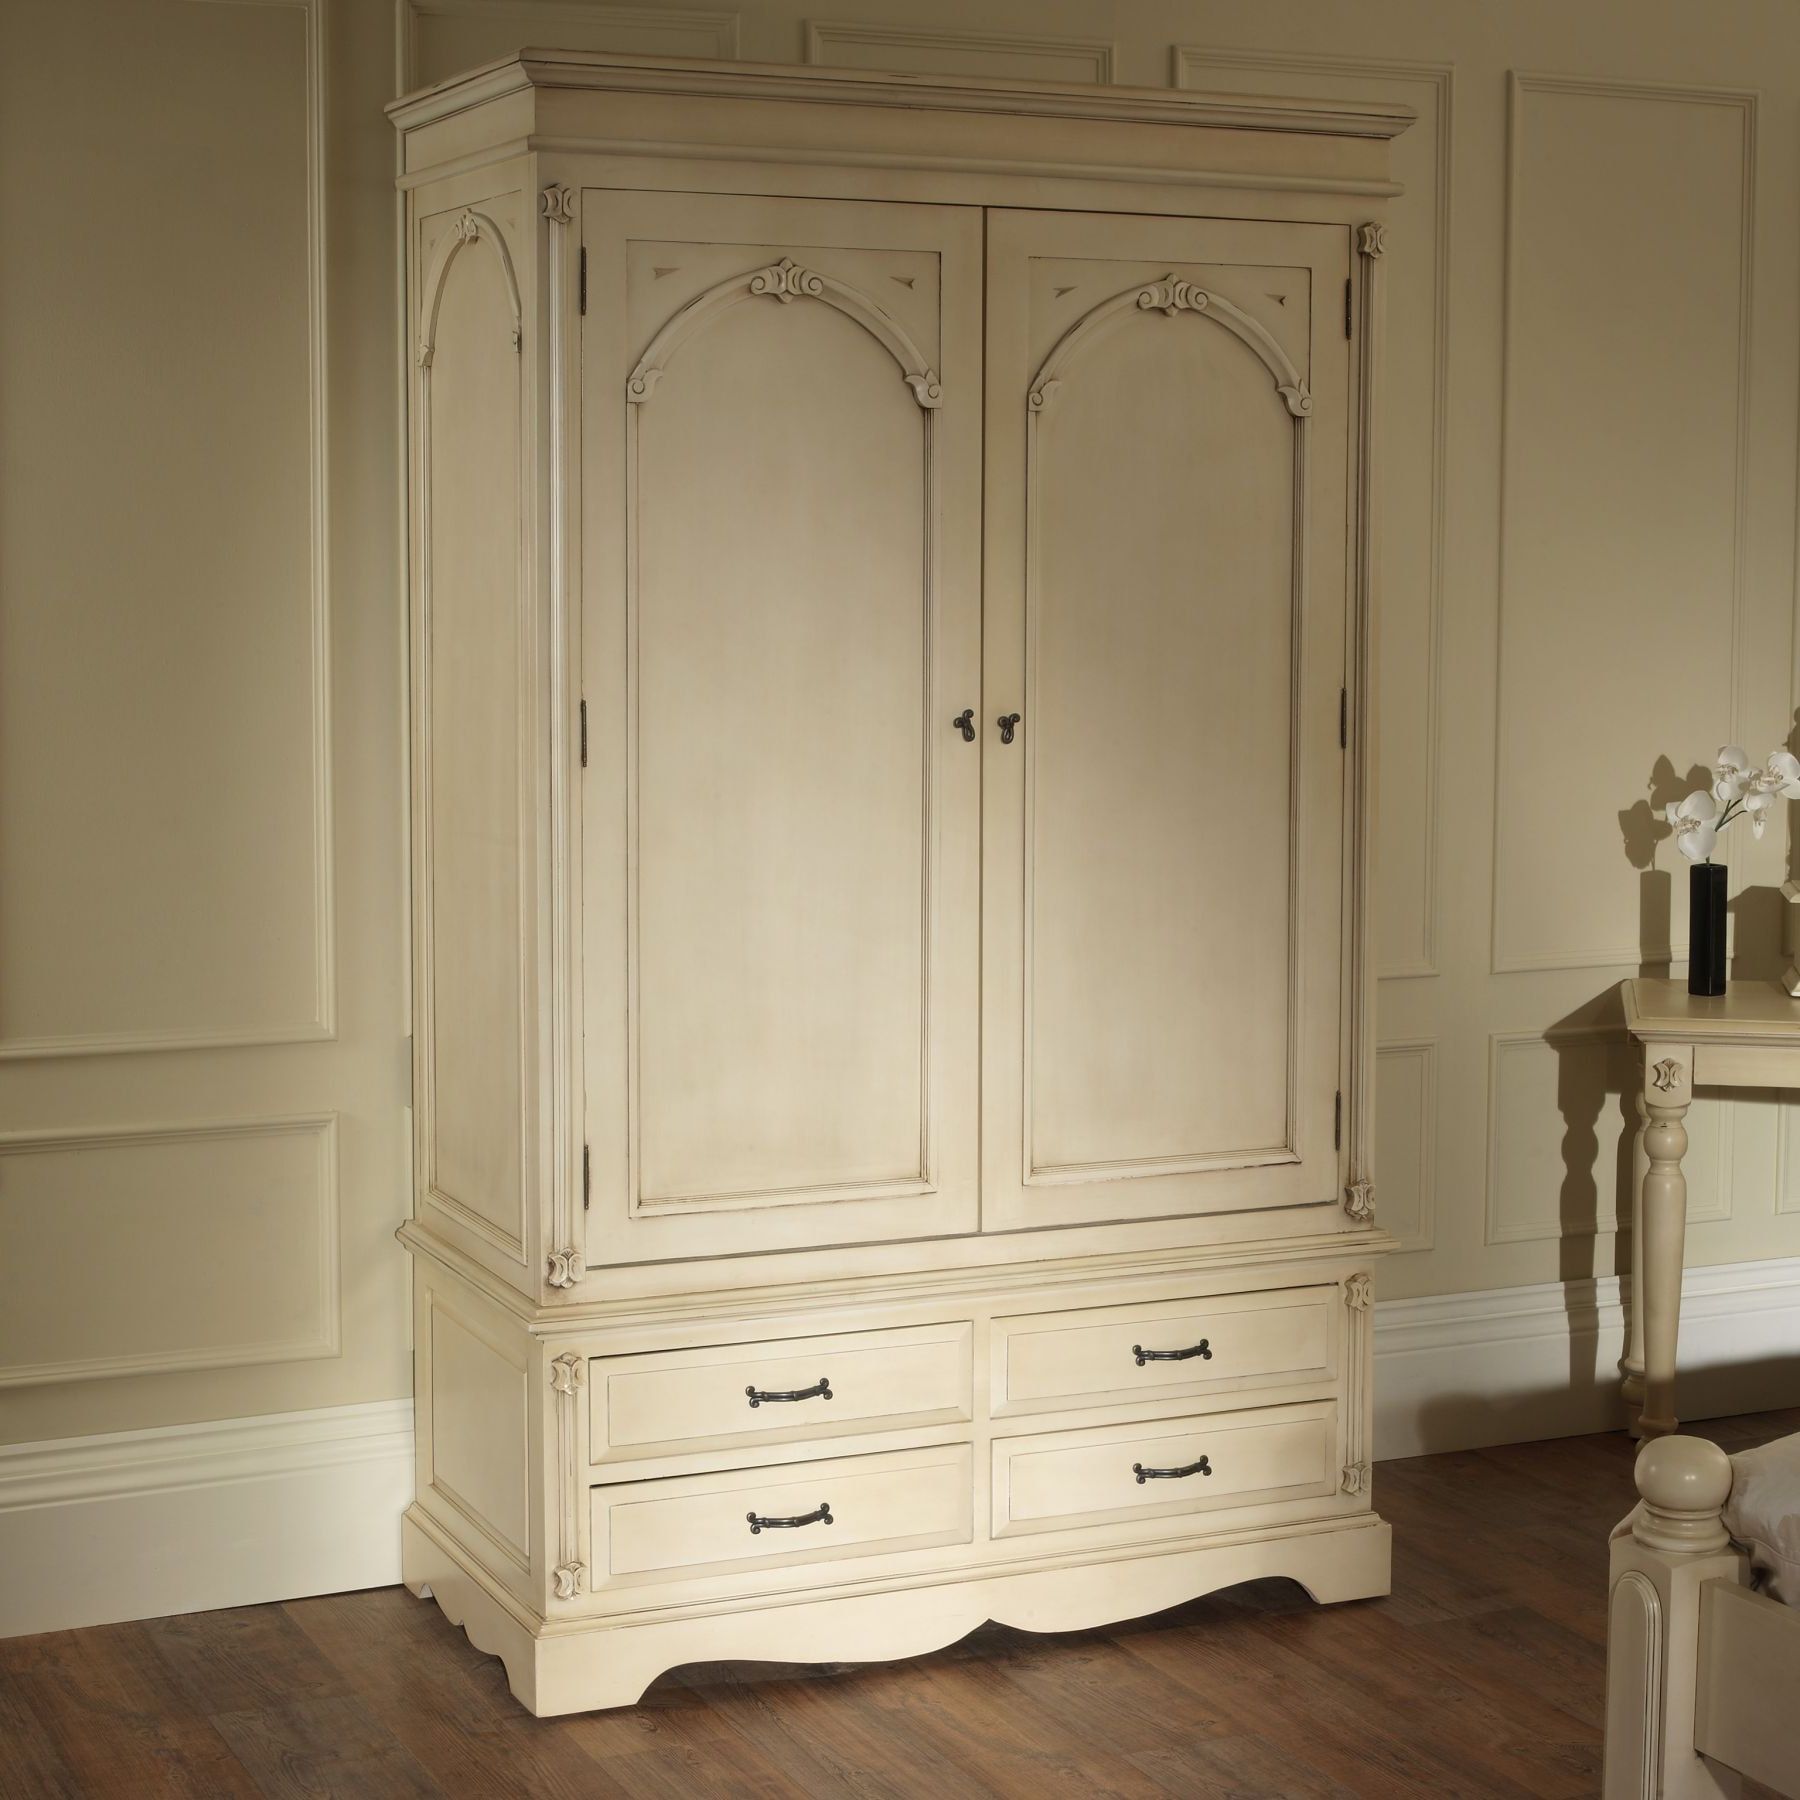 Victorian Antique French Wardrobe Works Well Alongside Our Shabby Chic  Furniture Intended For Victorian Style Wardrobes (Gallery 3 of 20)